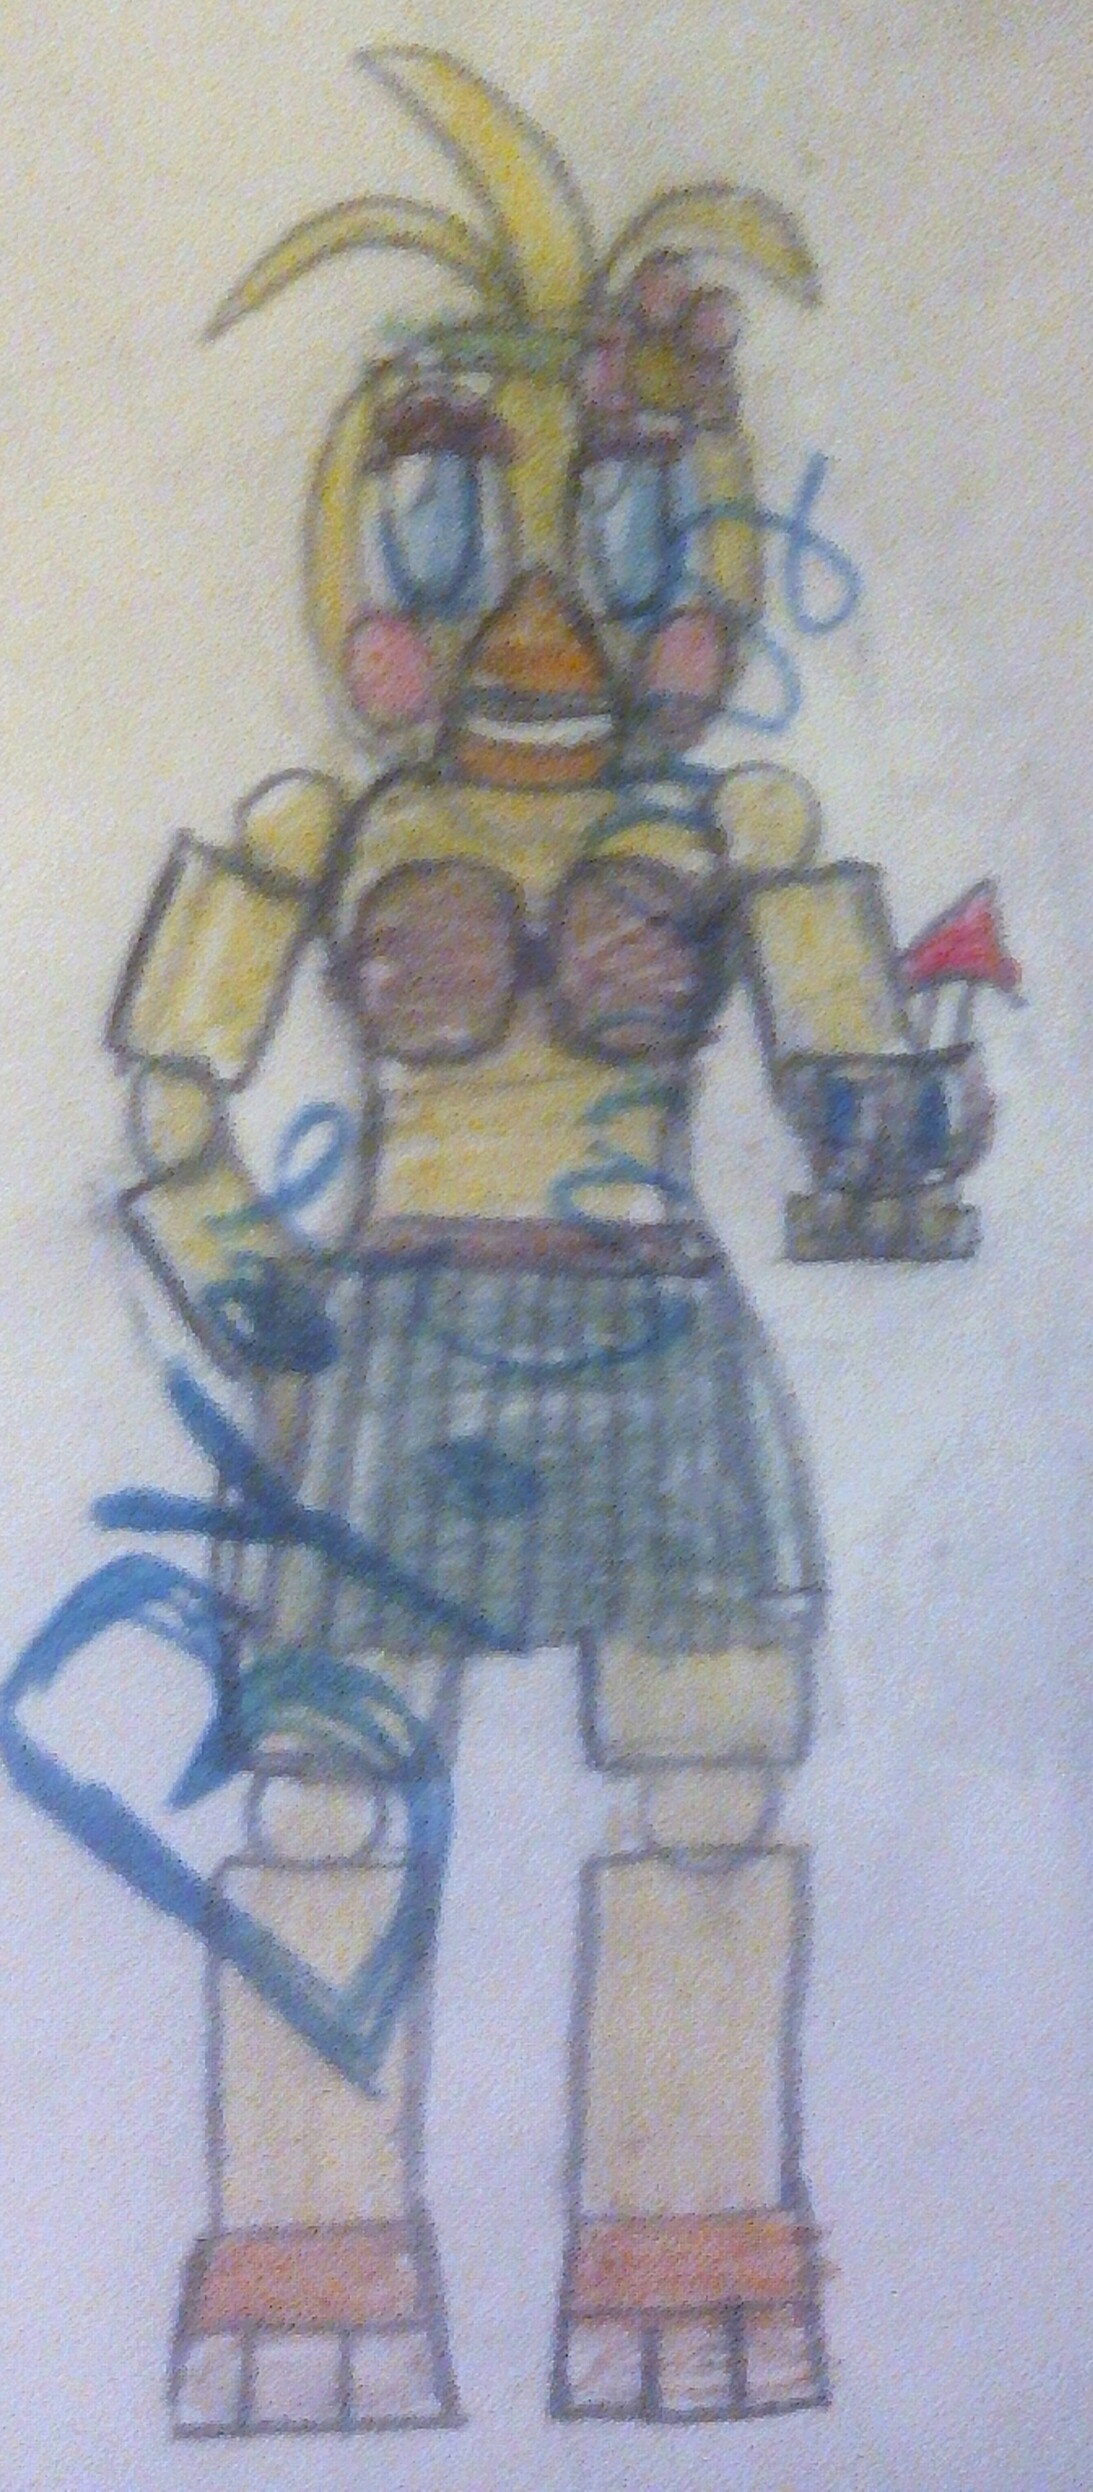 Cheerleader Funtime Chica (FNAF AR Skin Concept) by MCAboyan on